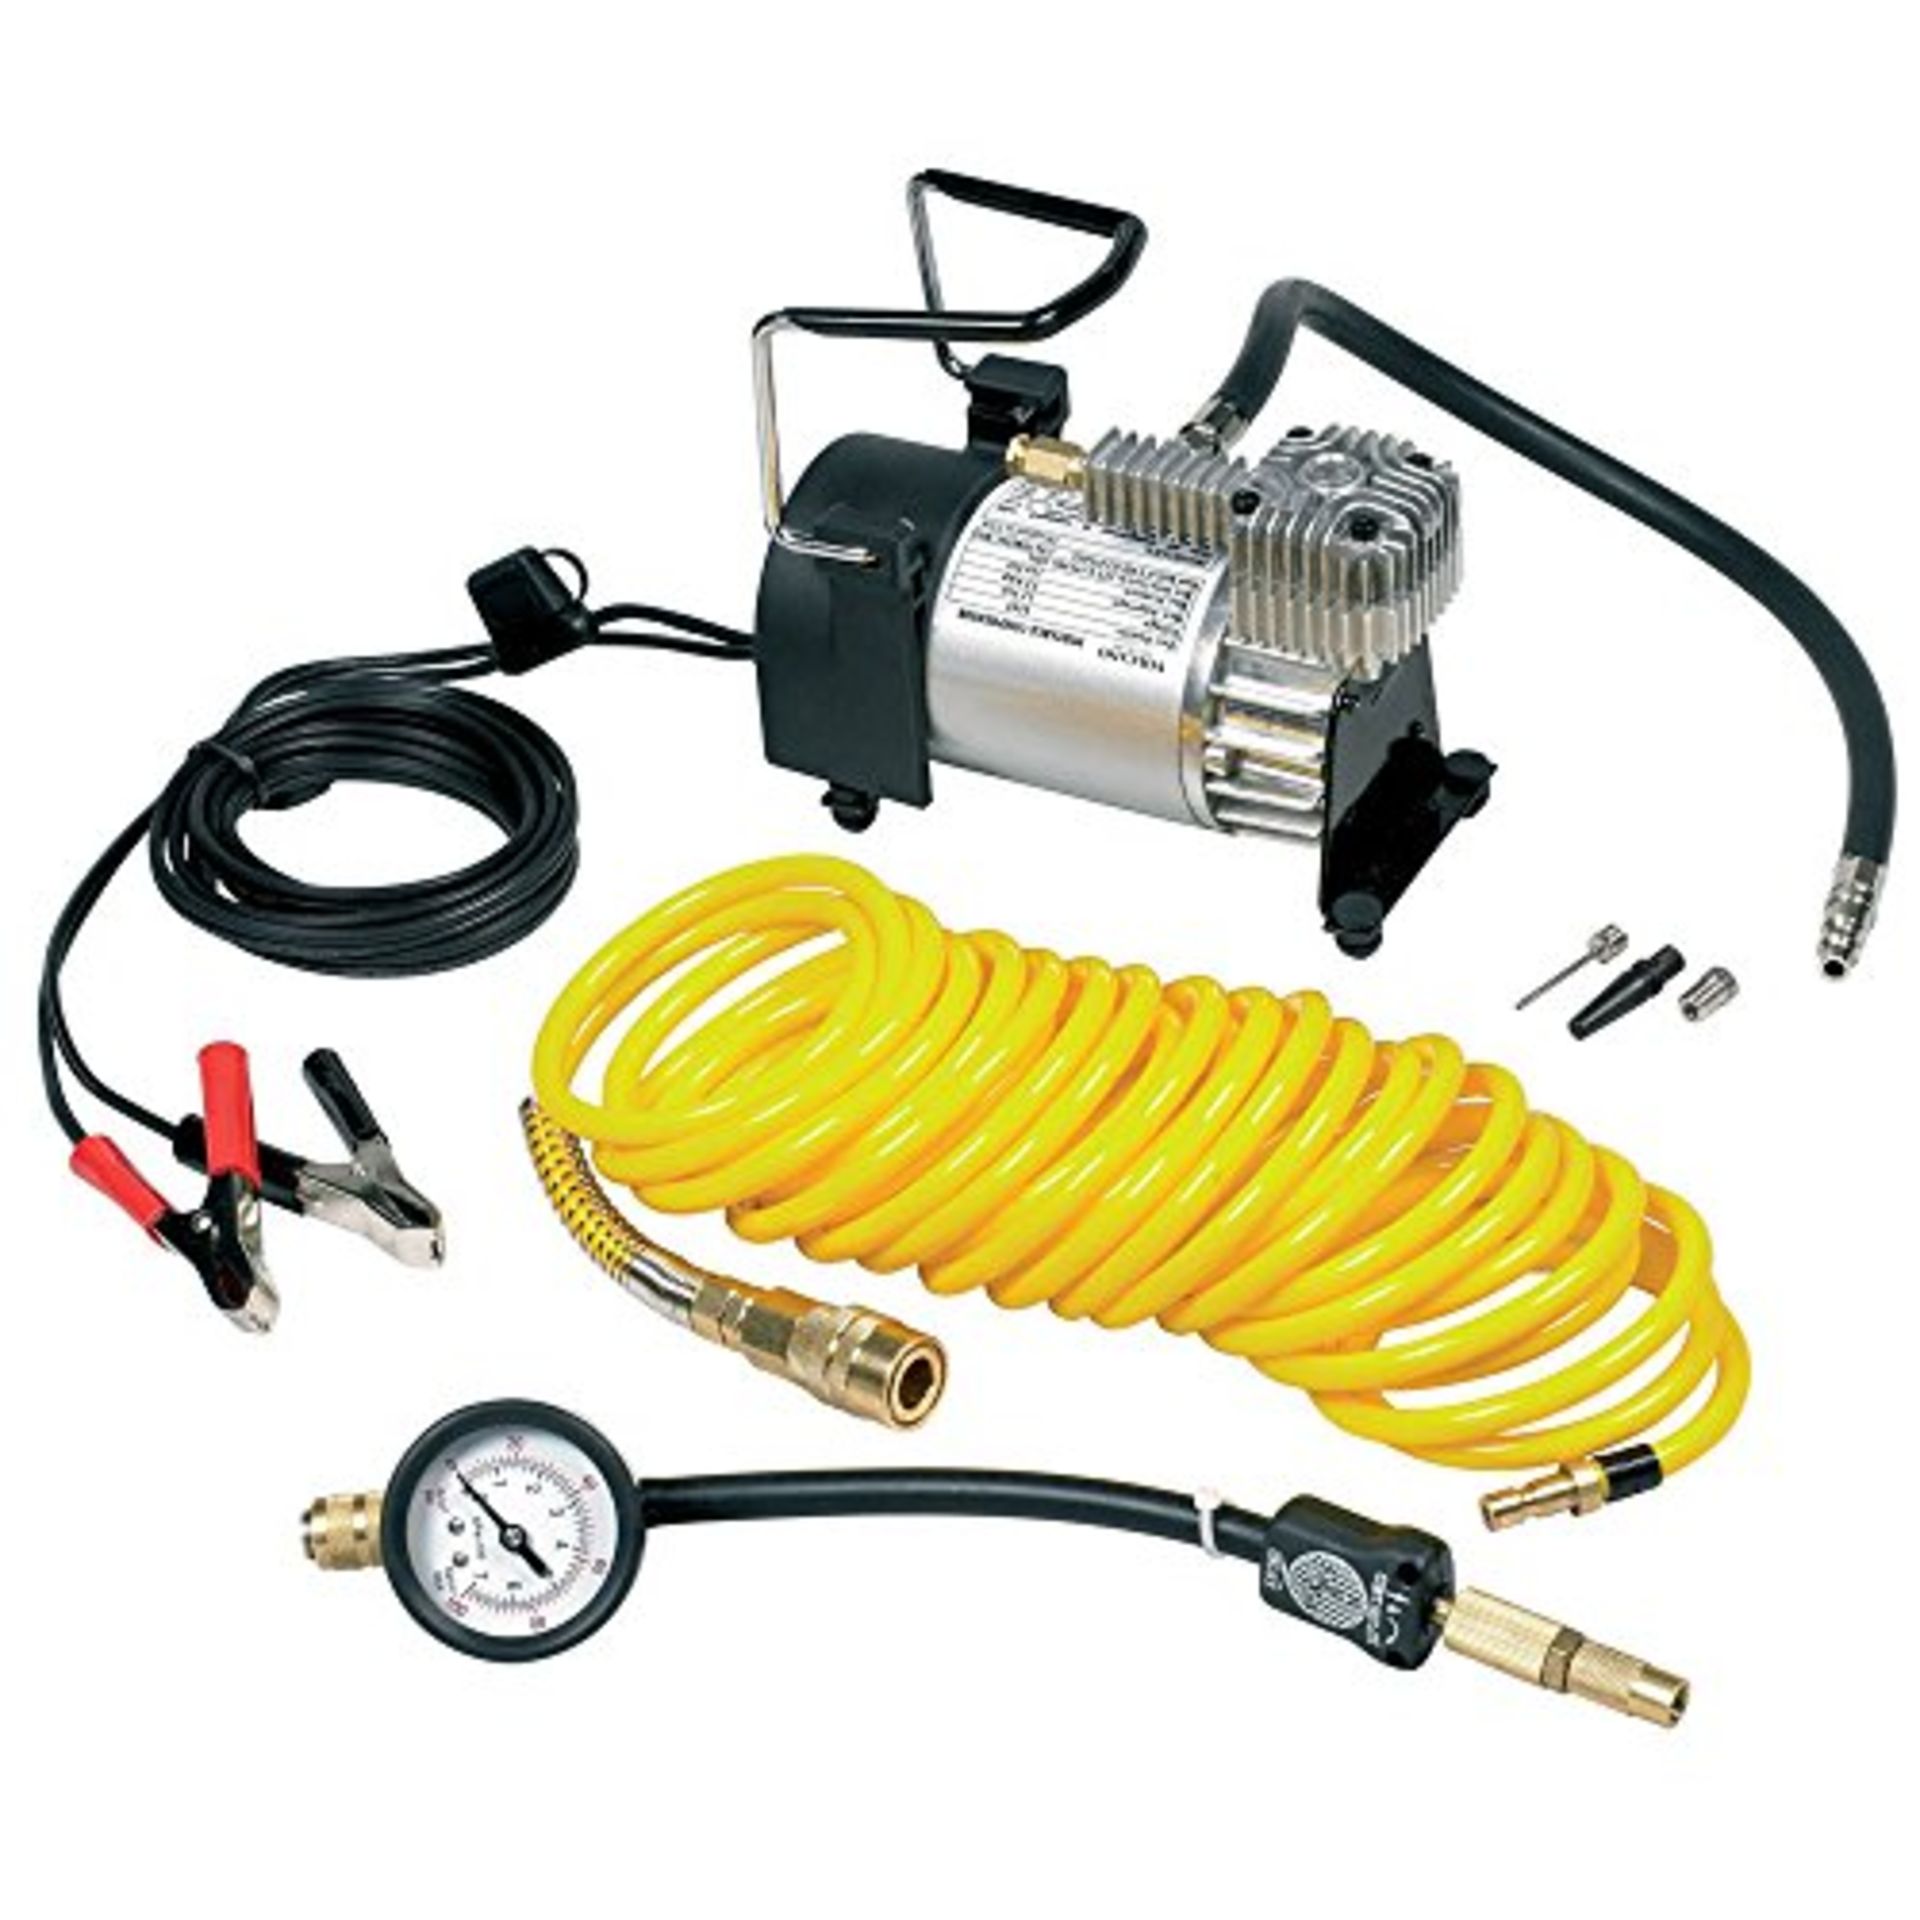 RRP £98.00 Ring RAC900 Heavy Duty Tyre Inflator, Air Compressor with 7m Extendable Airline, Brass